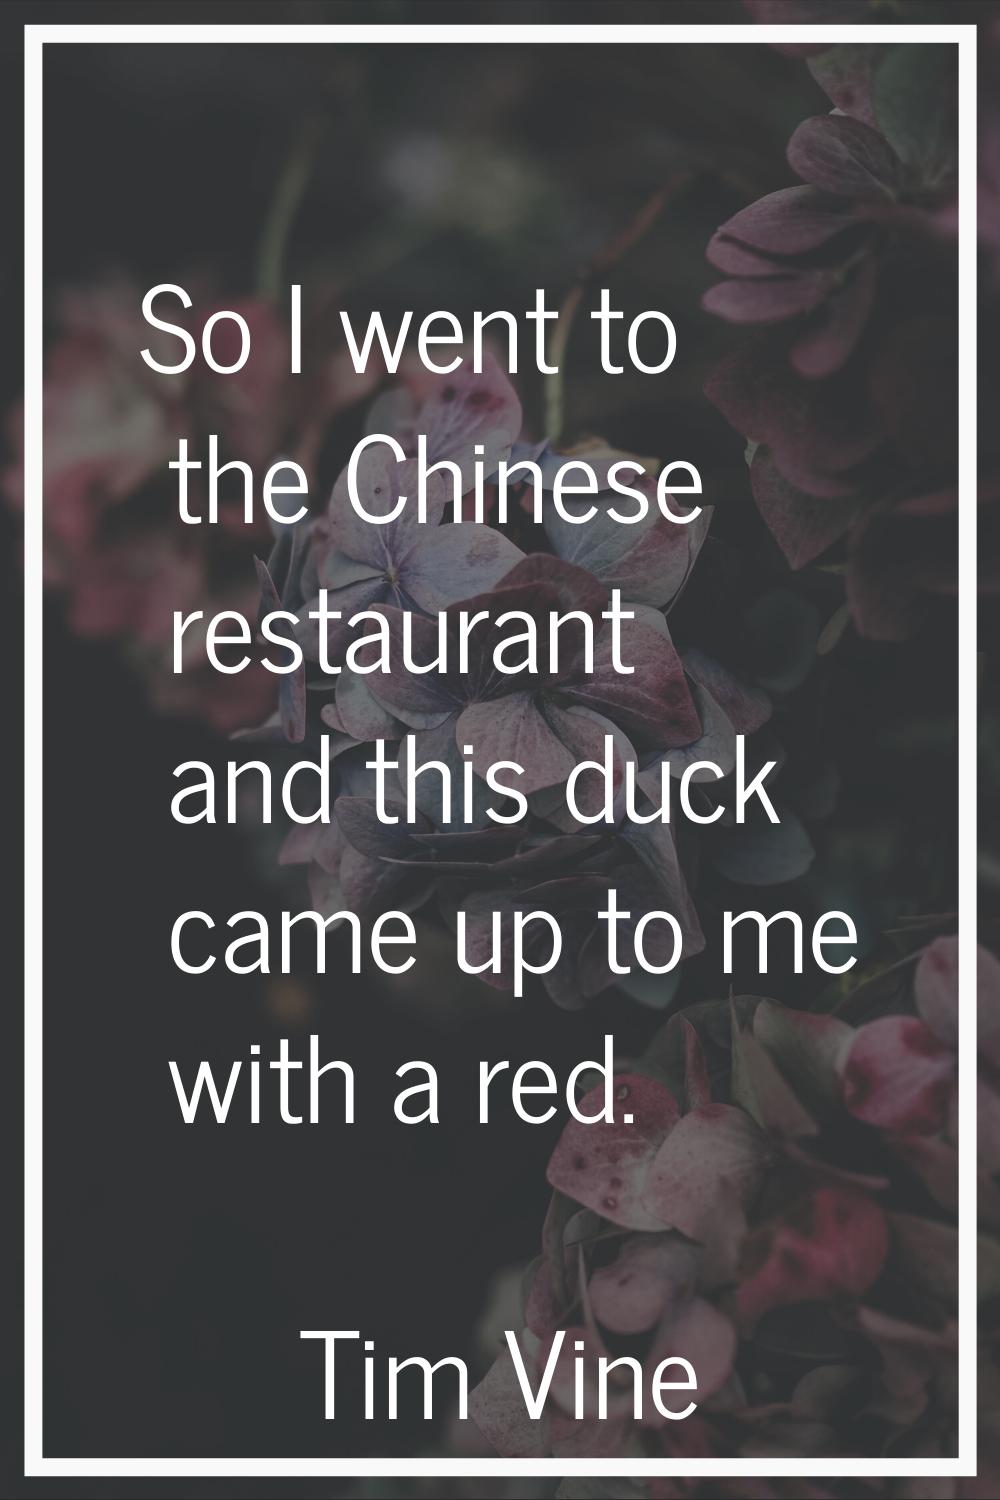 So I went to the Chinese restaurant and this duck came up to me with a red.